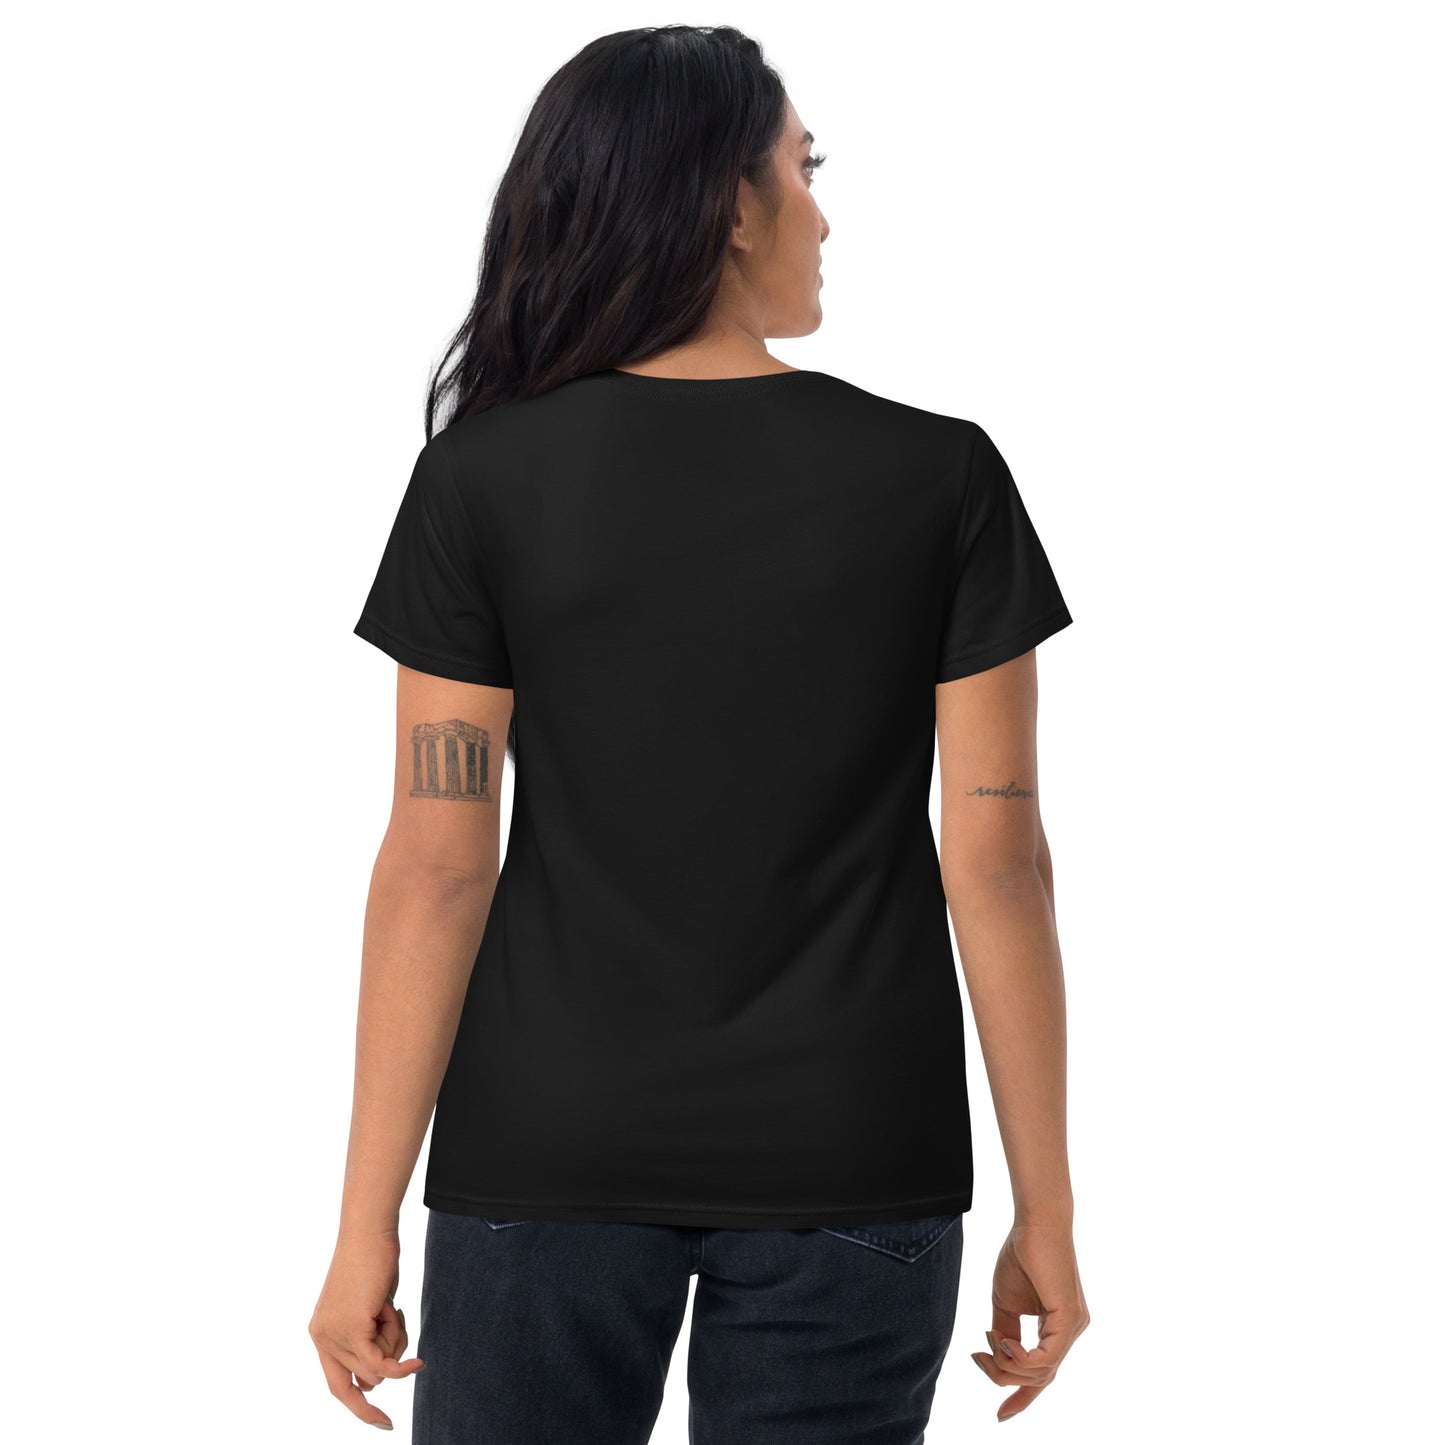 Have The Day You Deserve, Women's short sleeve t-shirt